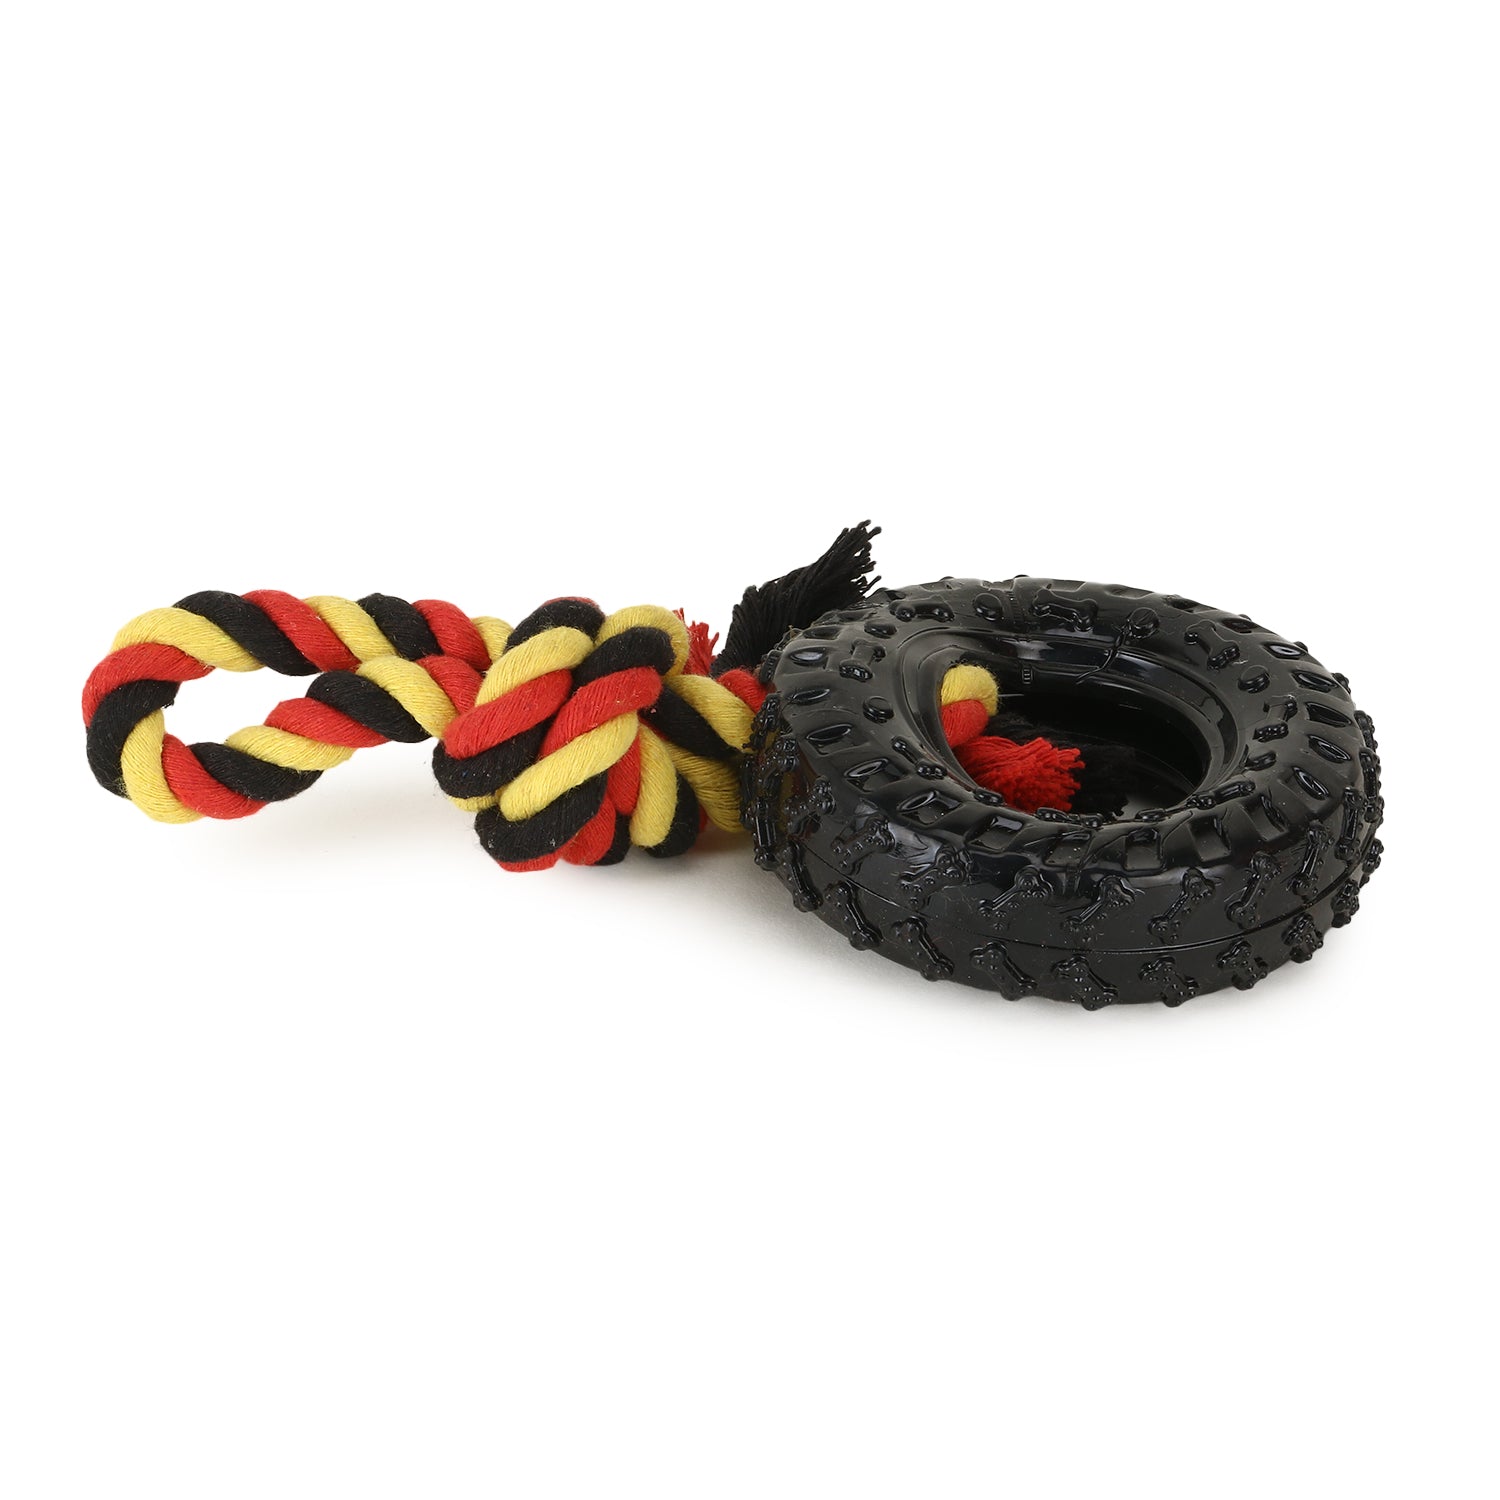 Basil - Rubber Tyre with Rope for Tugging & Hollow Centre for Treat Stuffing